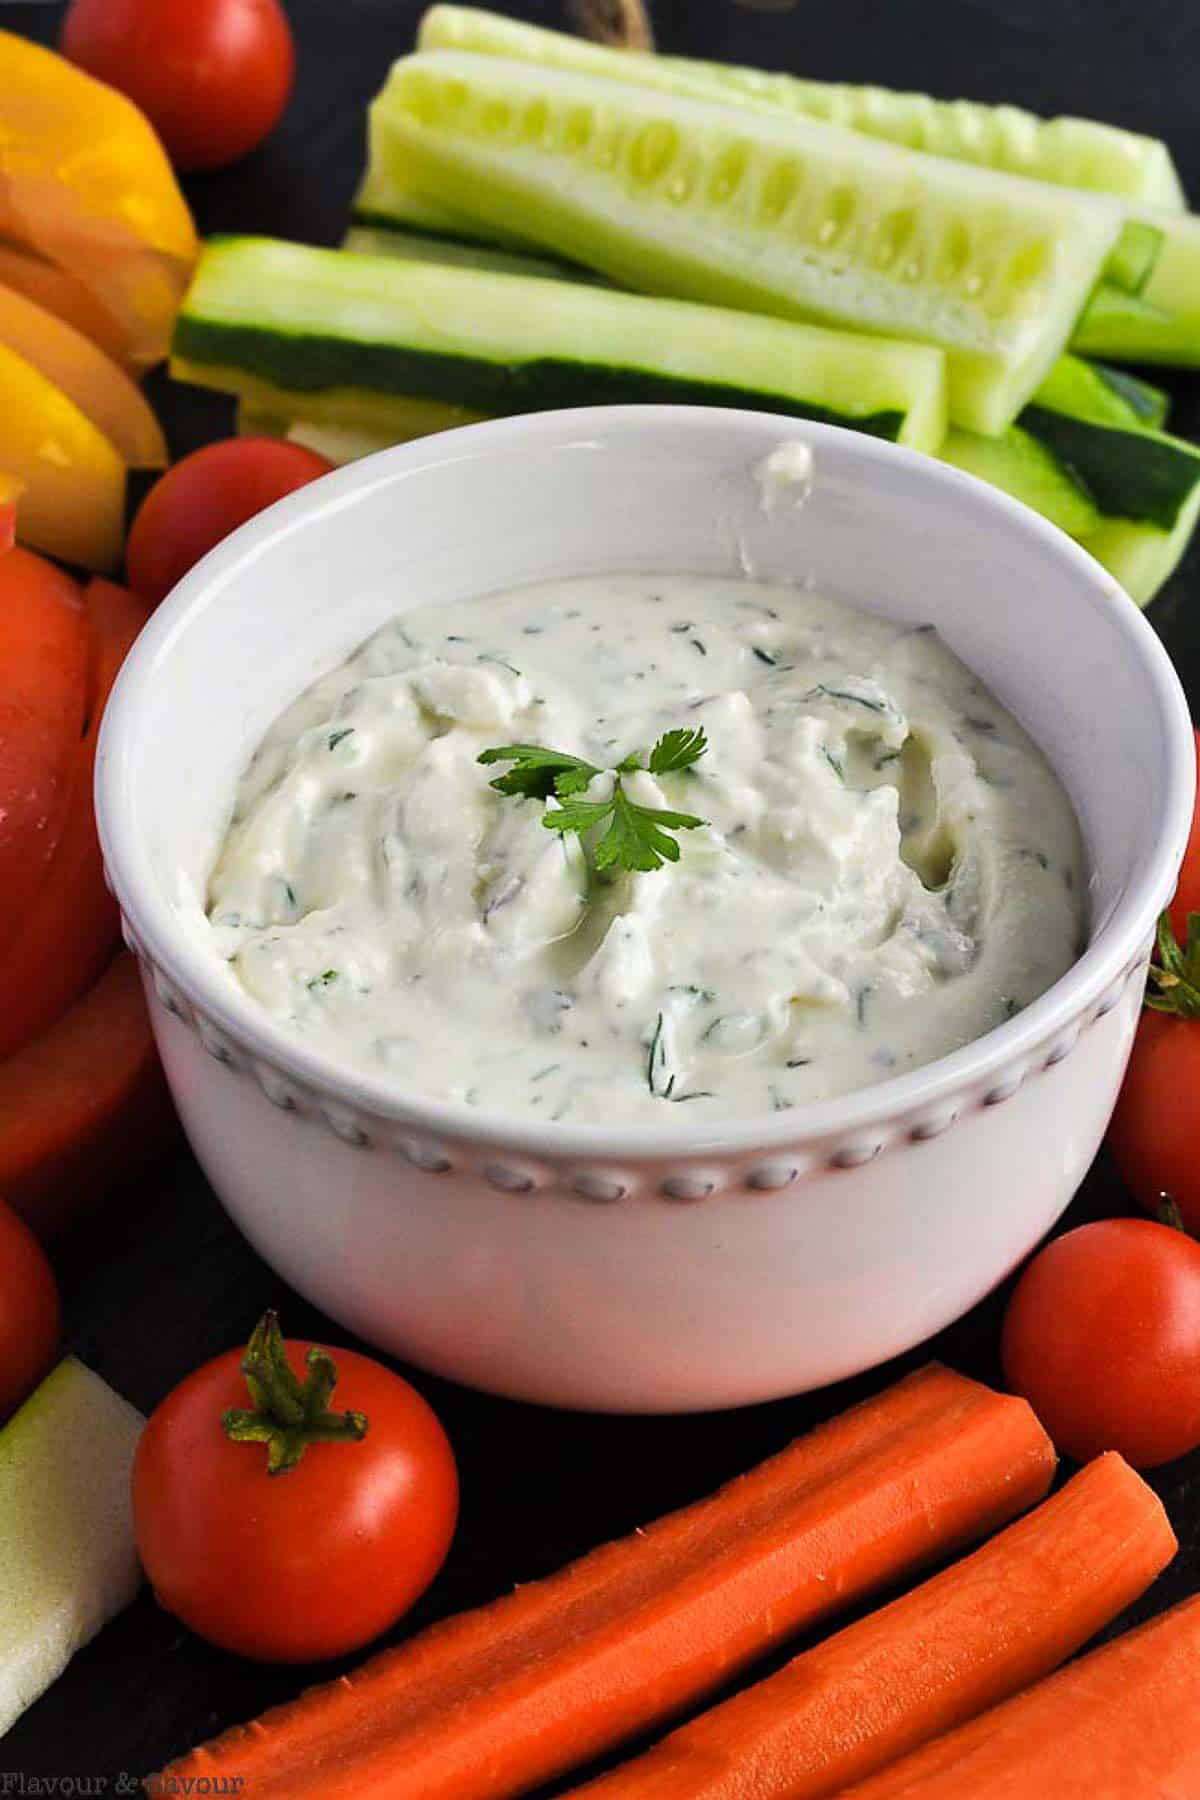 A bowl of feta dip with lemon and herbs surrounded by fresh vegetables.